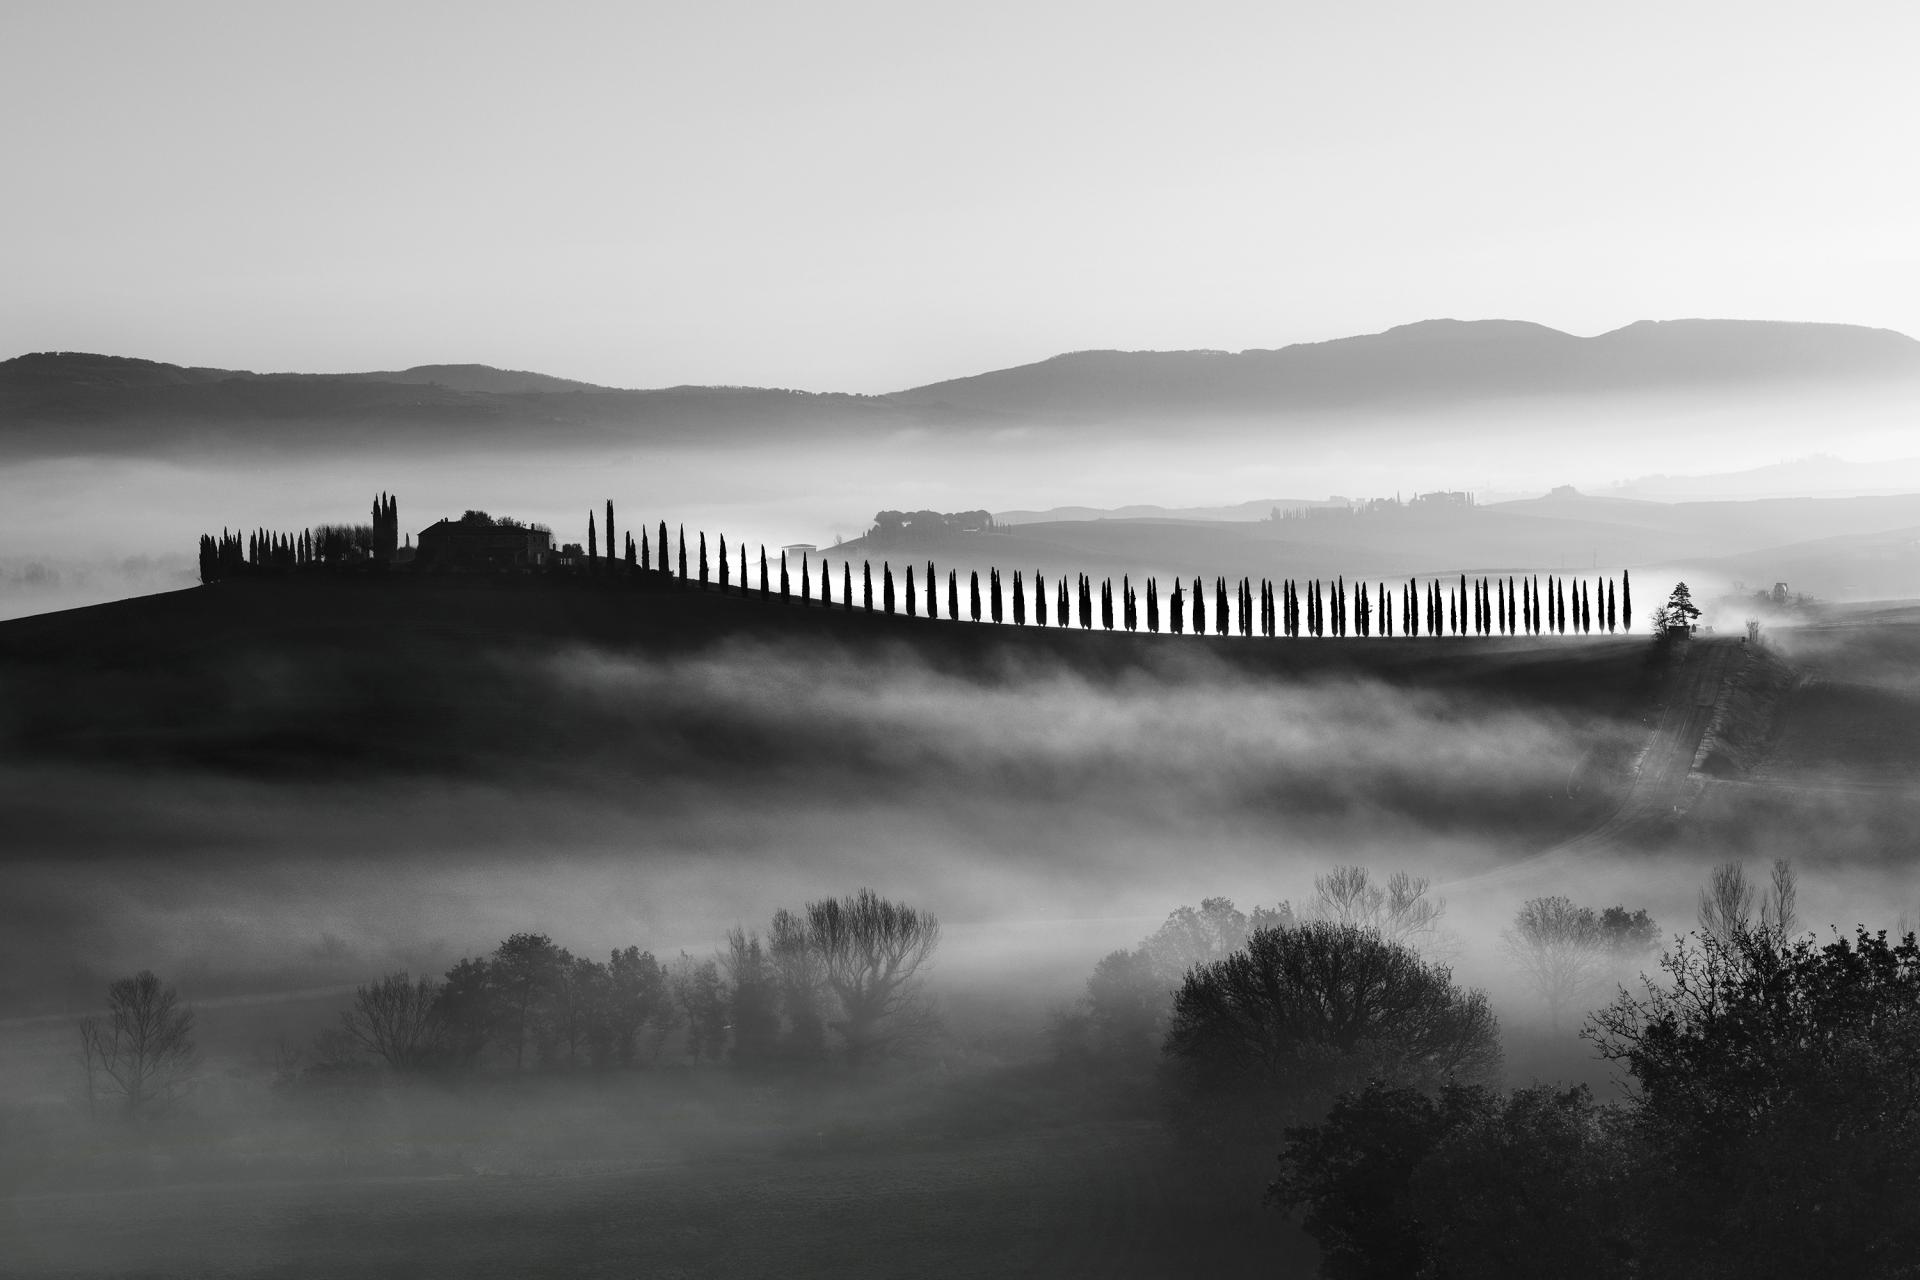 New York Photography Awards Winner - Tuscan Cypresses in the mist of dawn